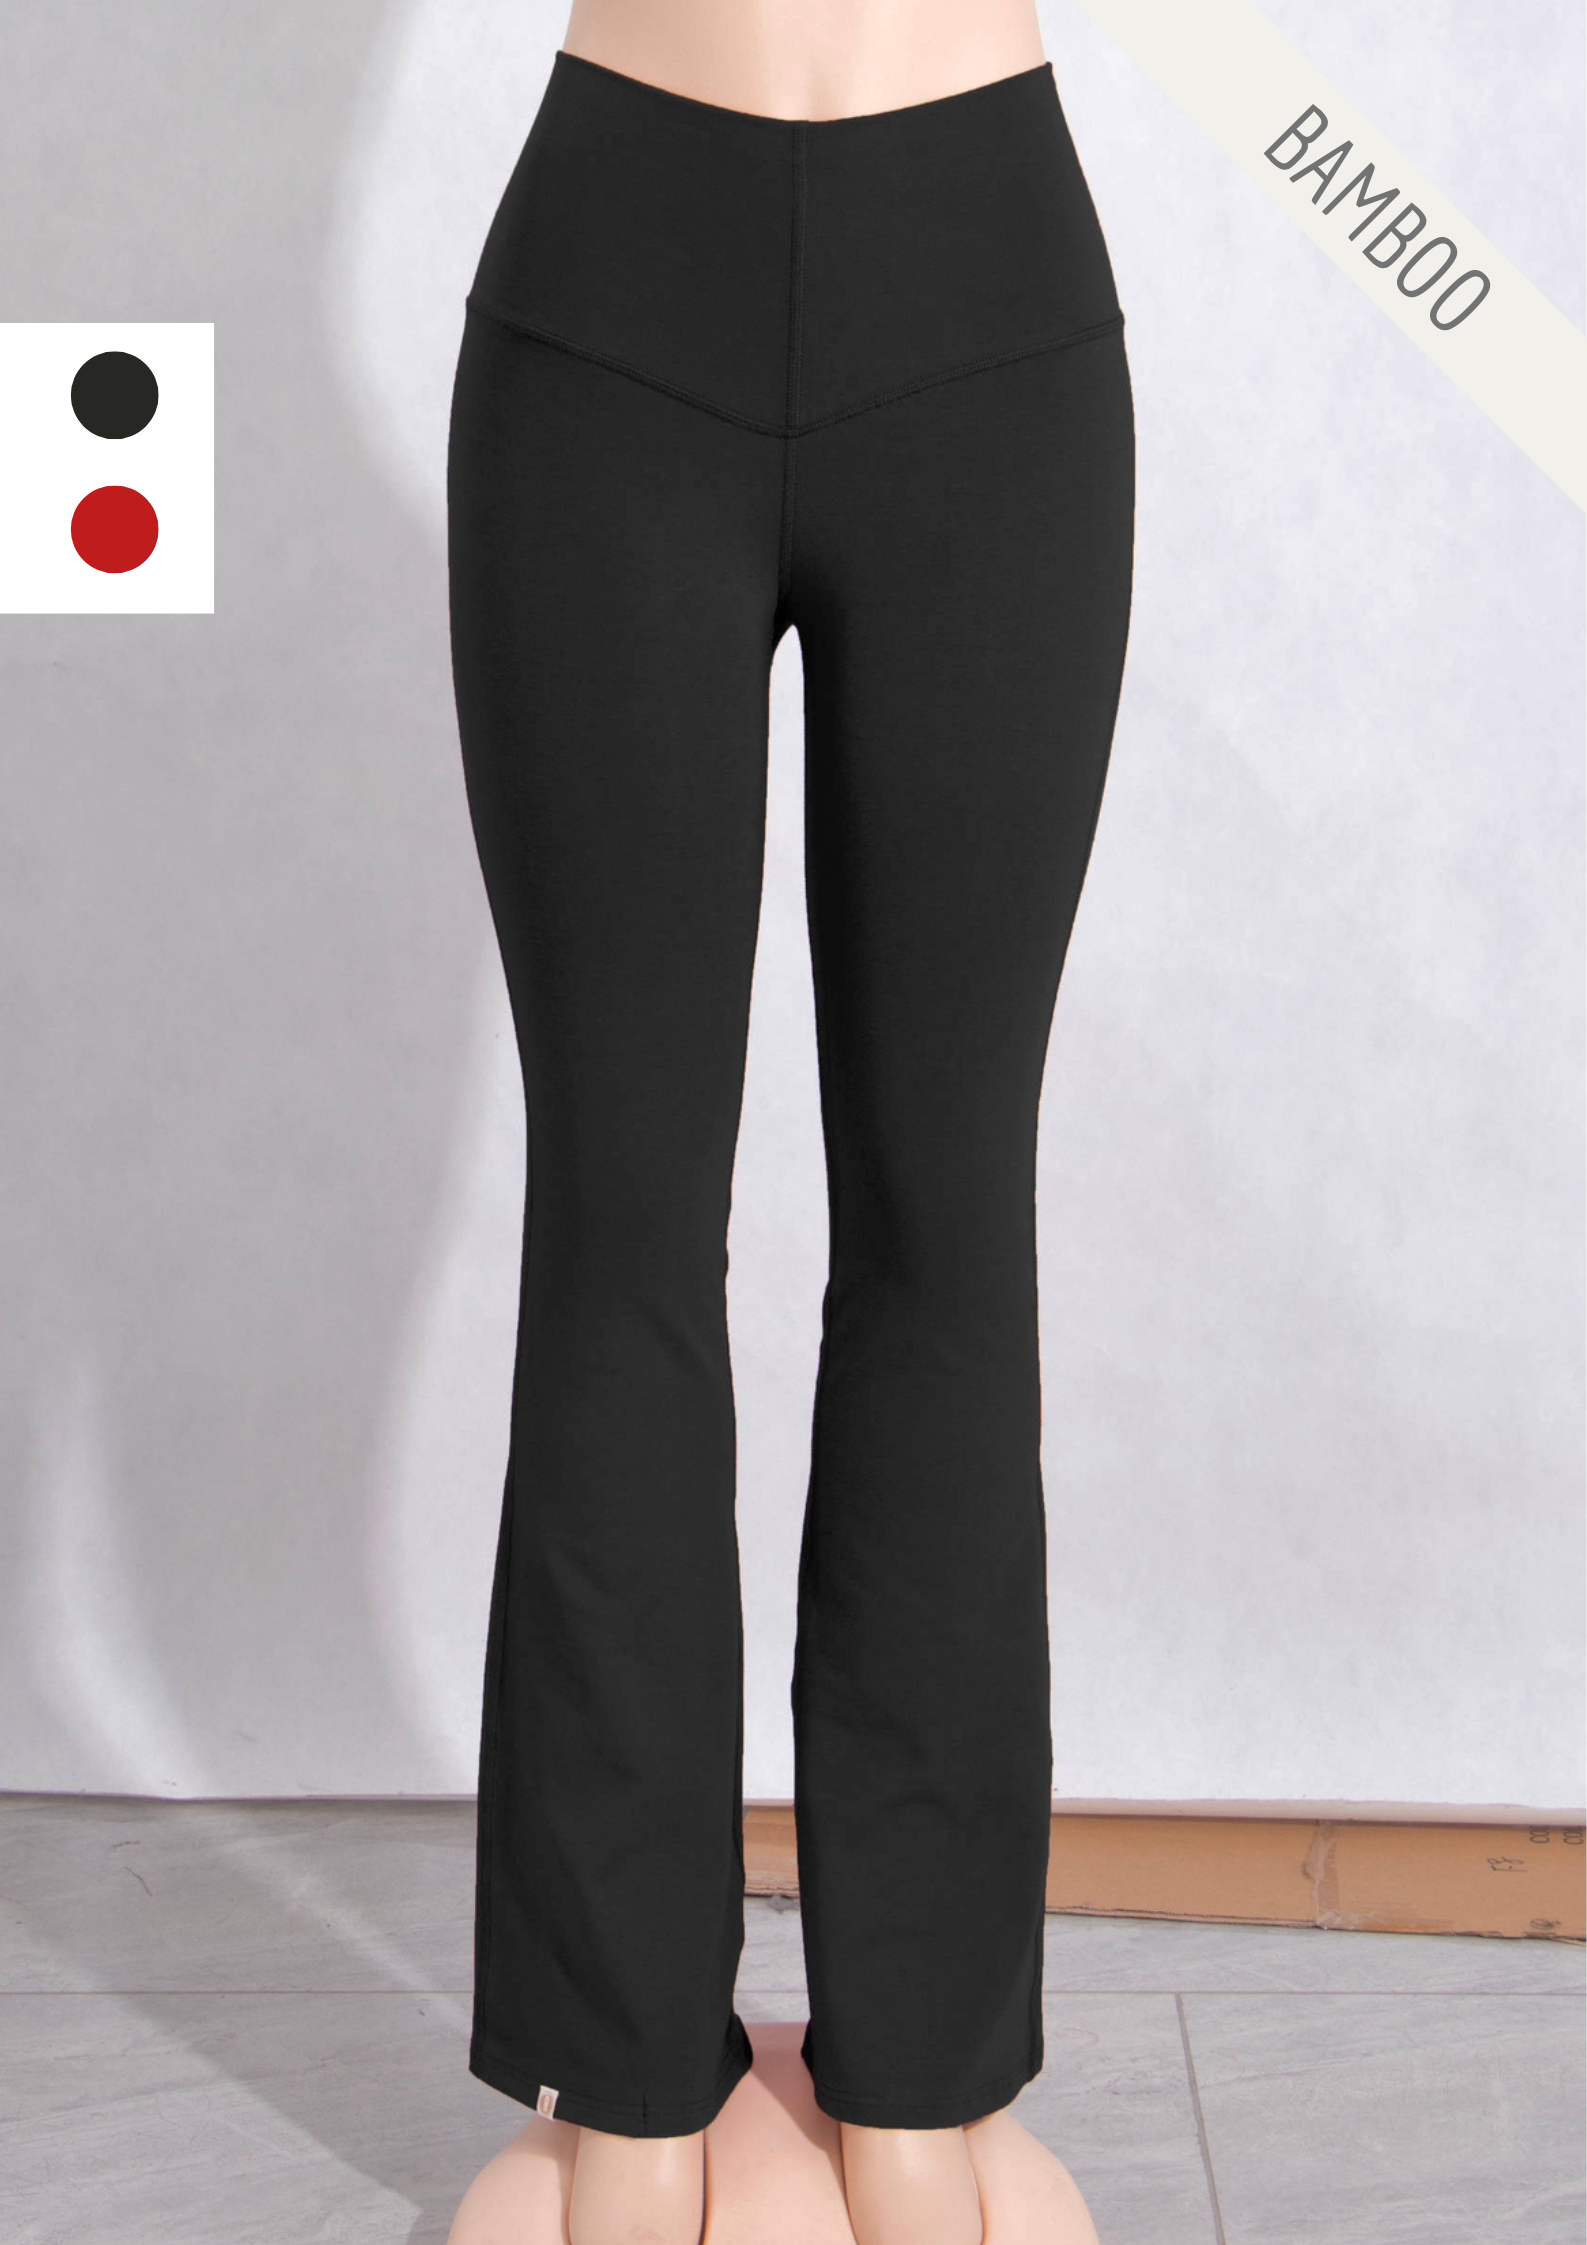 Shop Bamboo Clothing Yoga Pants for Women up to 70 Off  DealDoodle